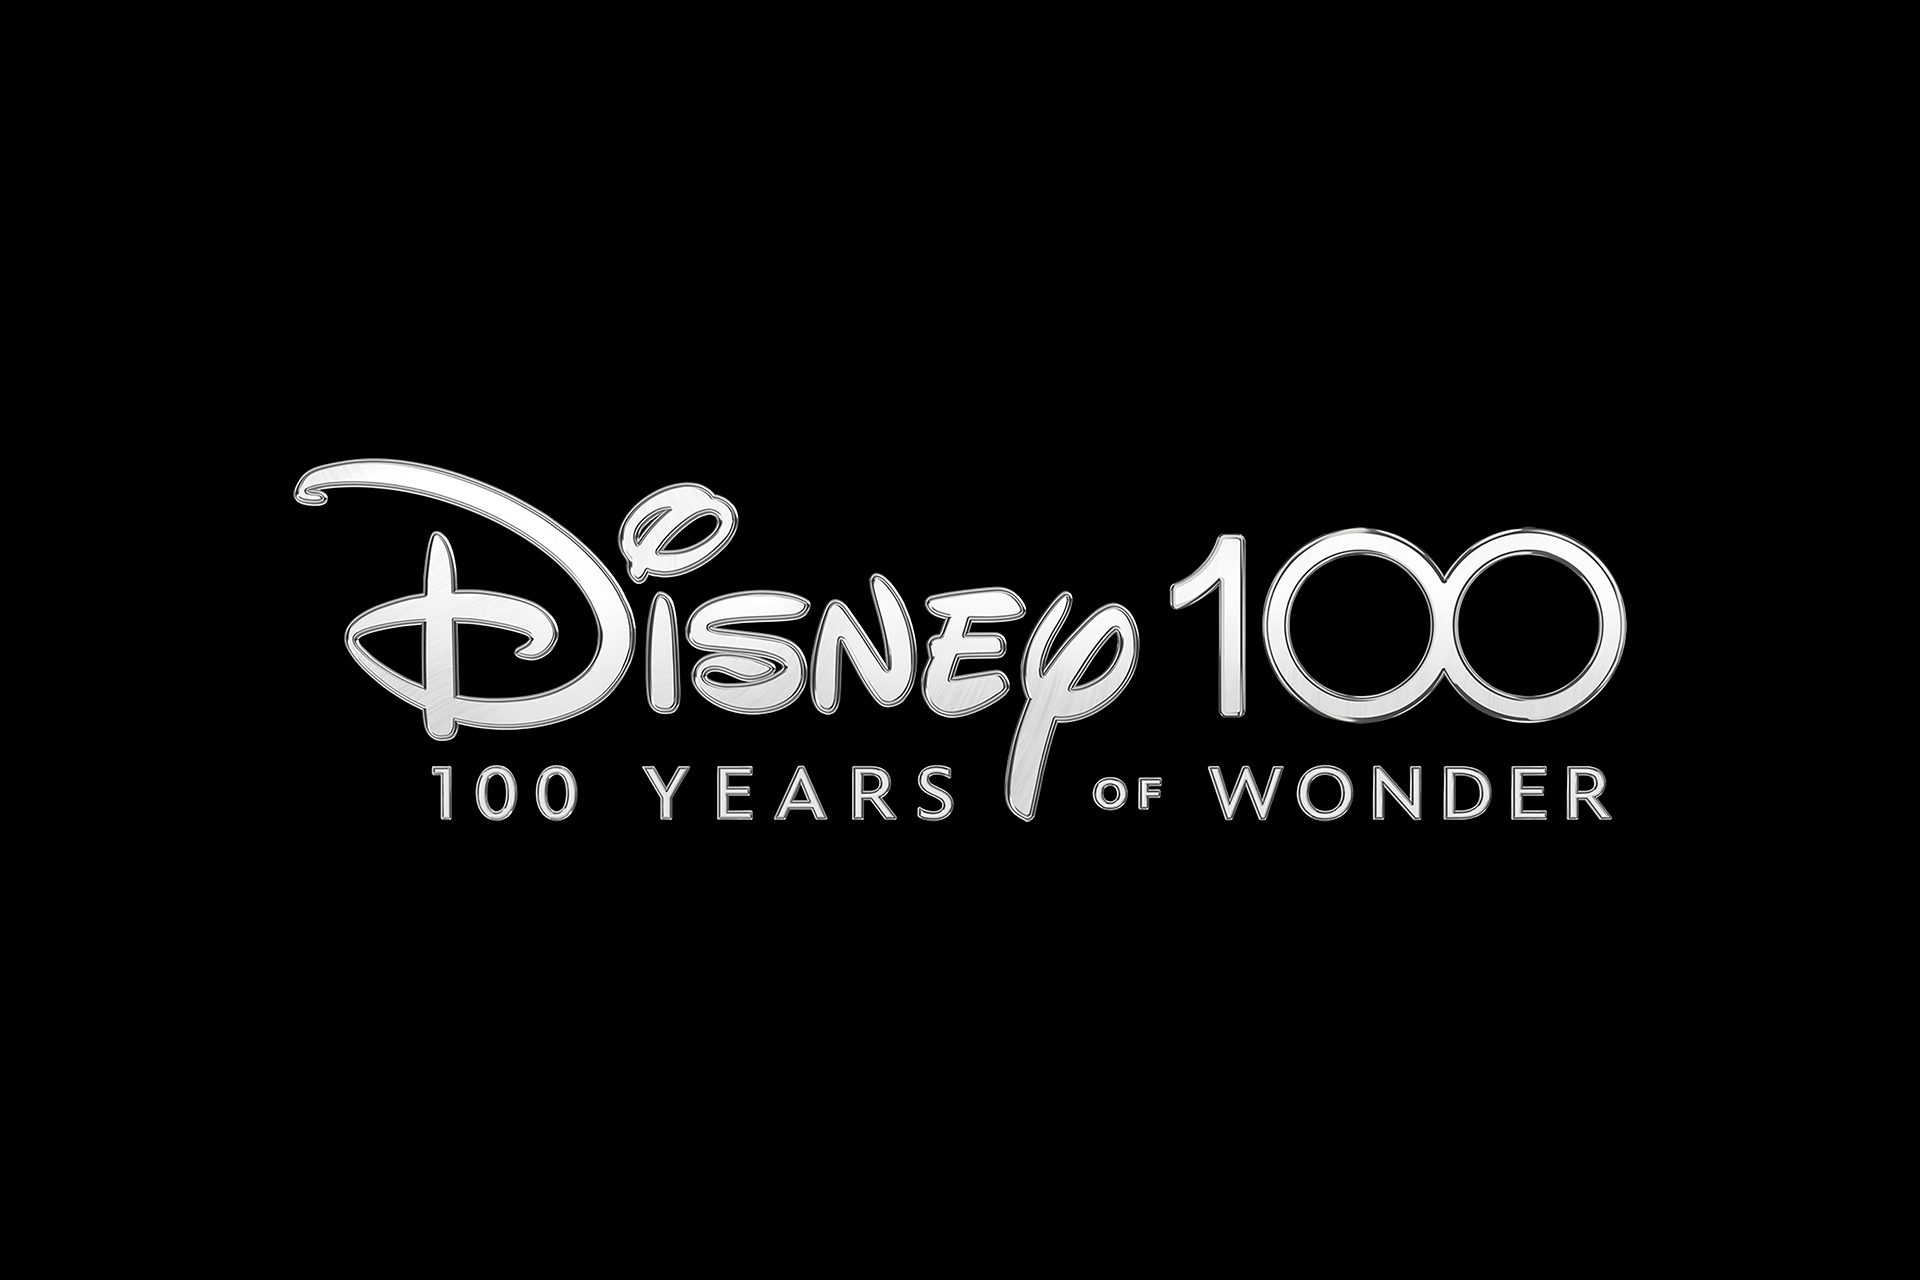 New Details About Disney 100 Years of Wonder Revealed to Fans